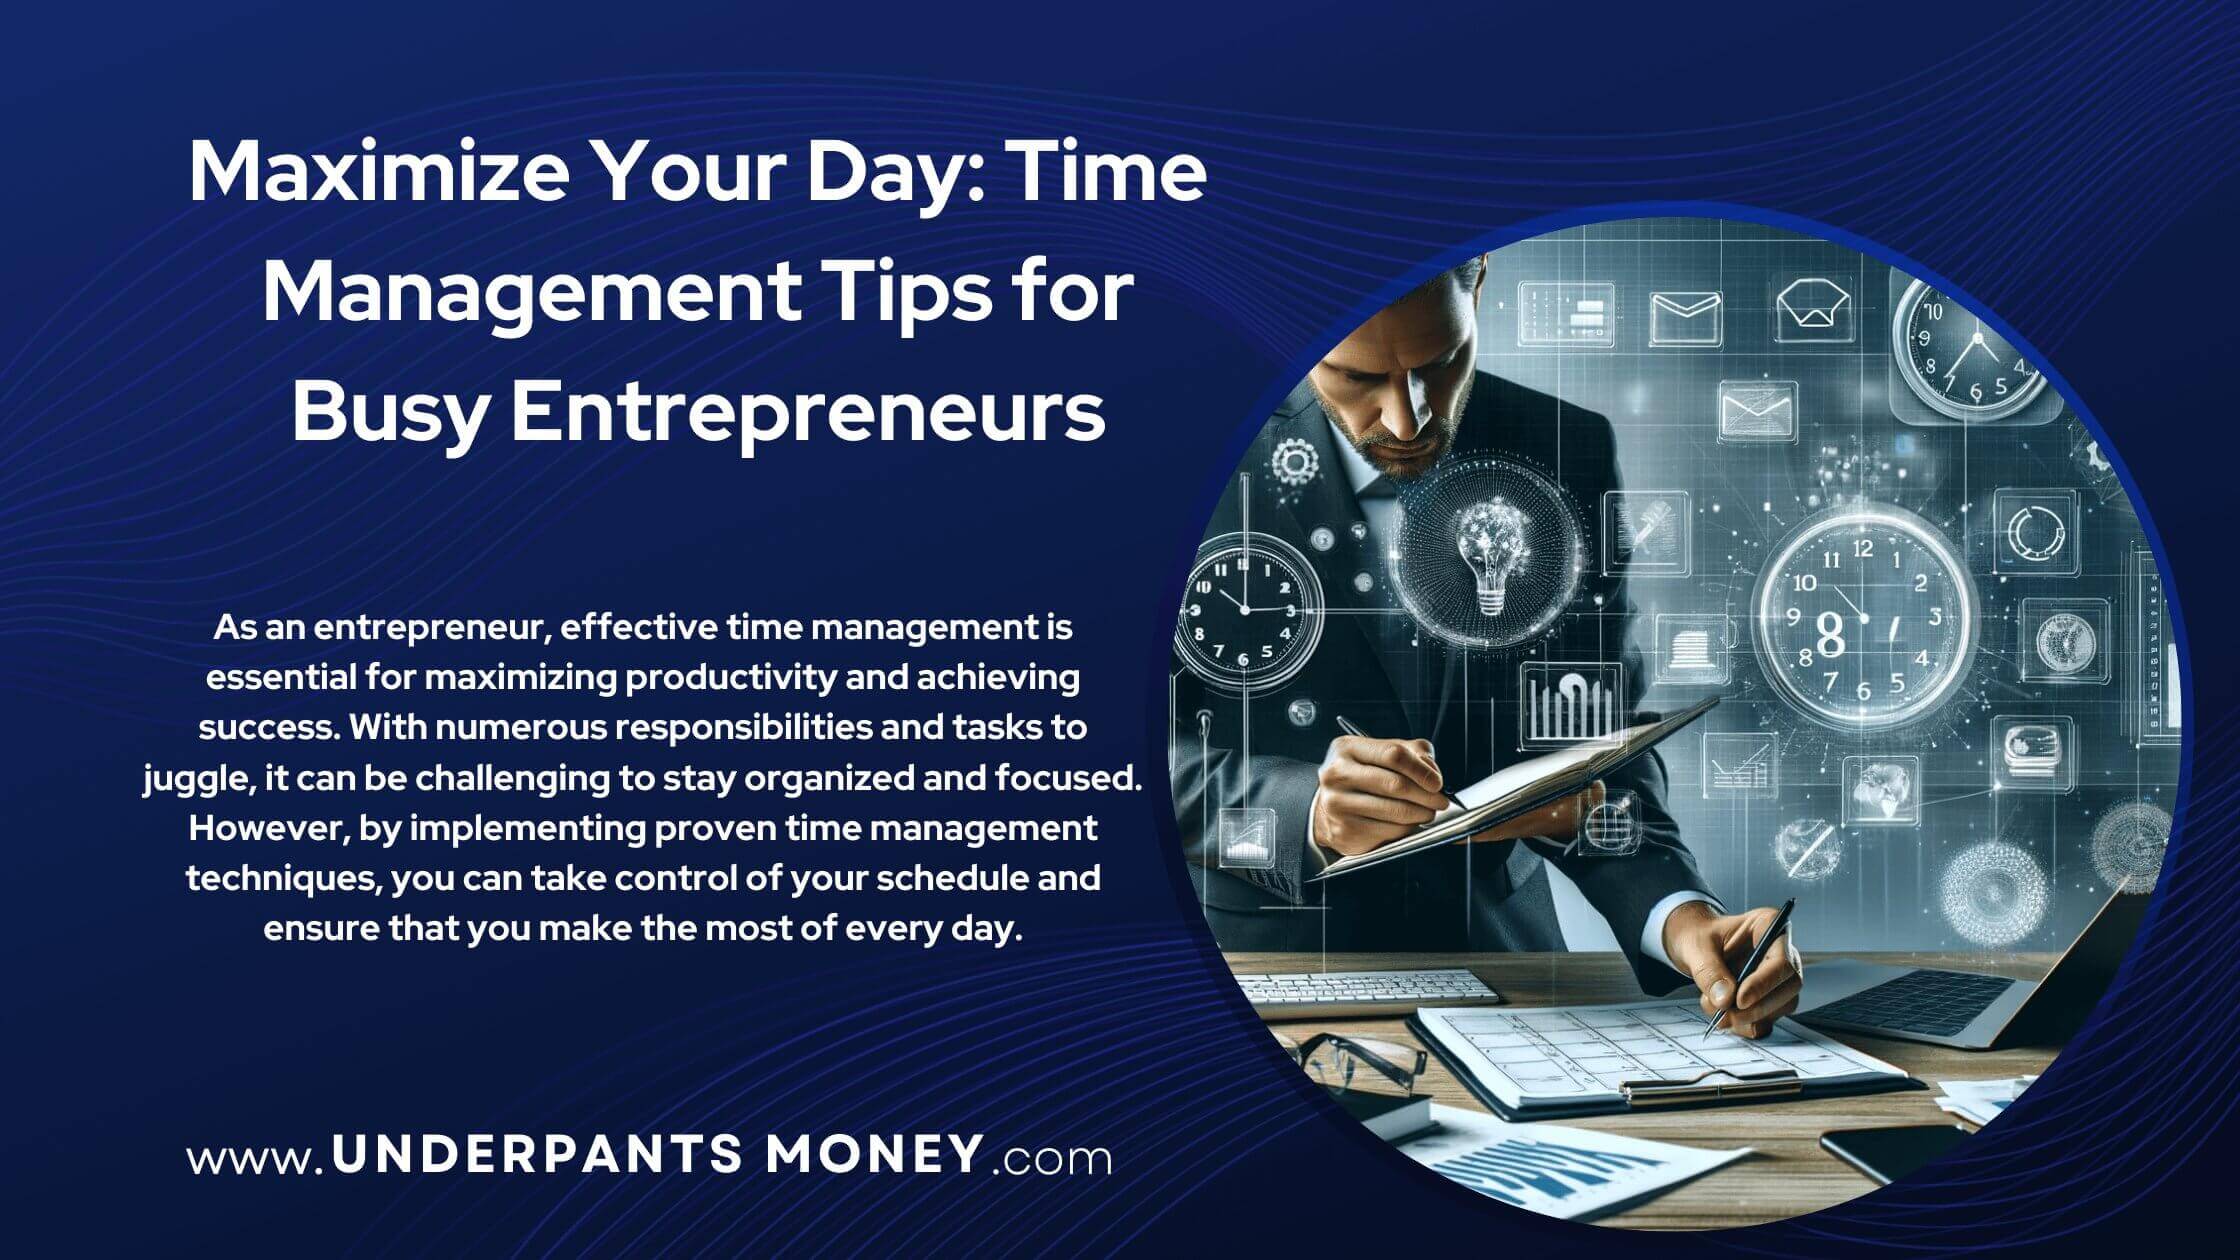 Time management tips for busy entrepreneurs title with descriptive text on blue with image of productive man sitting at desk